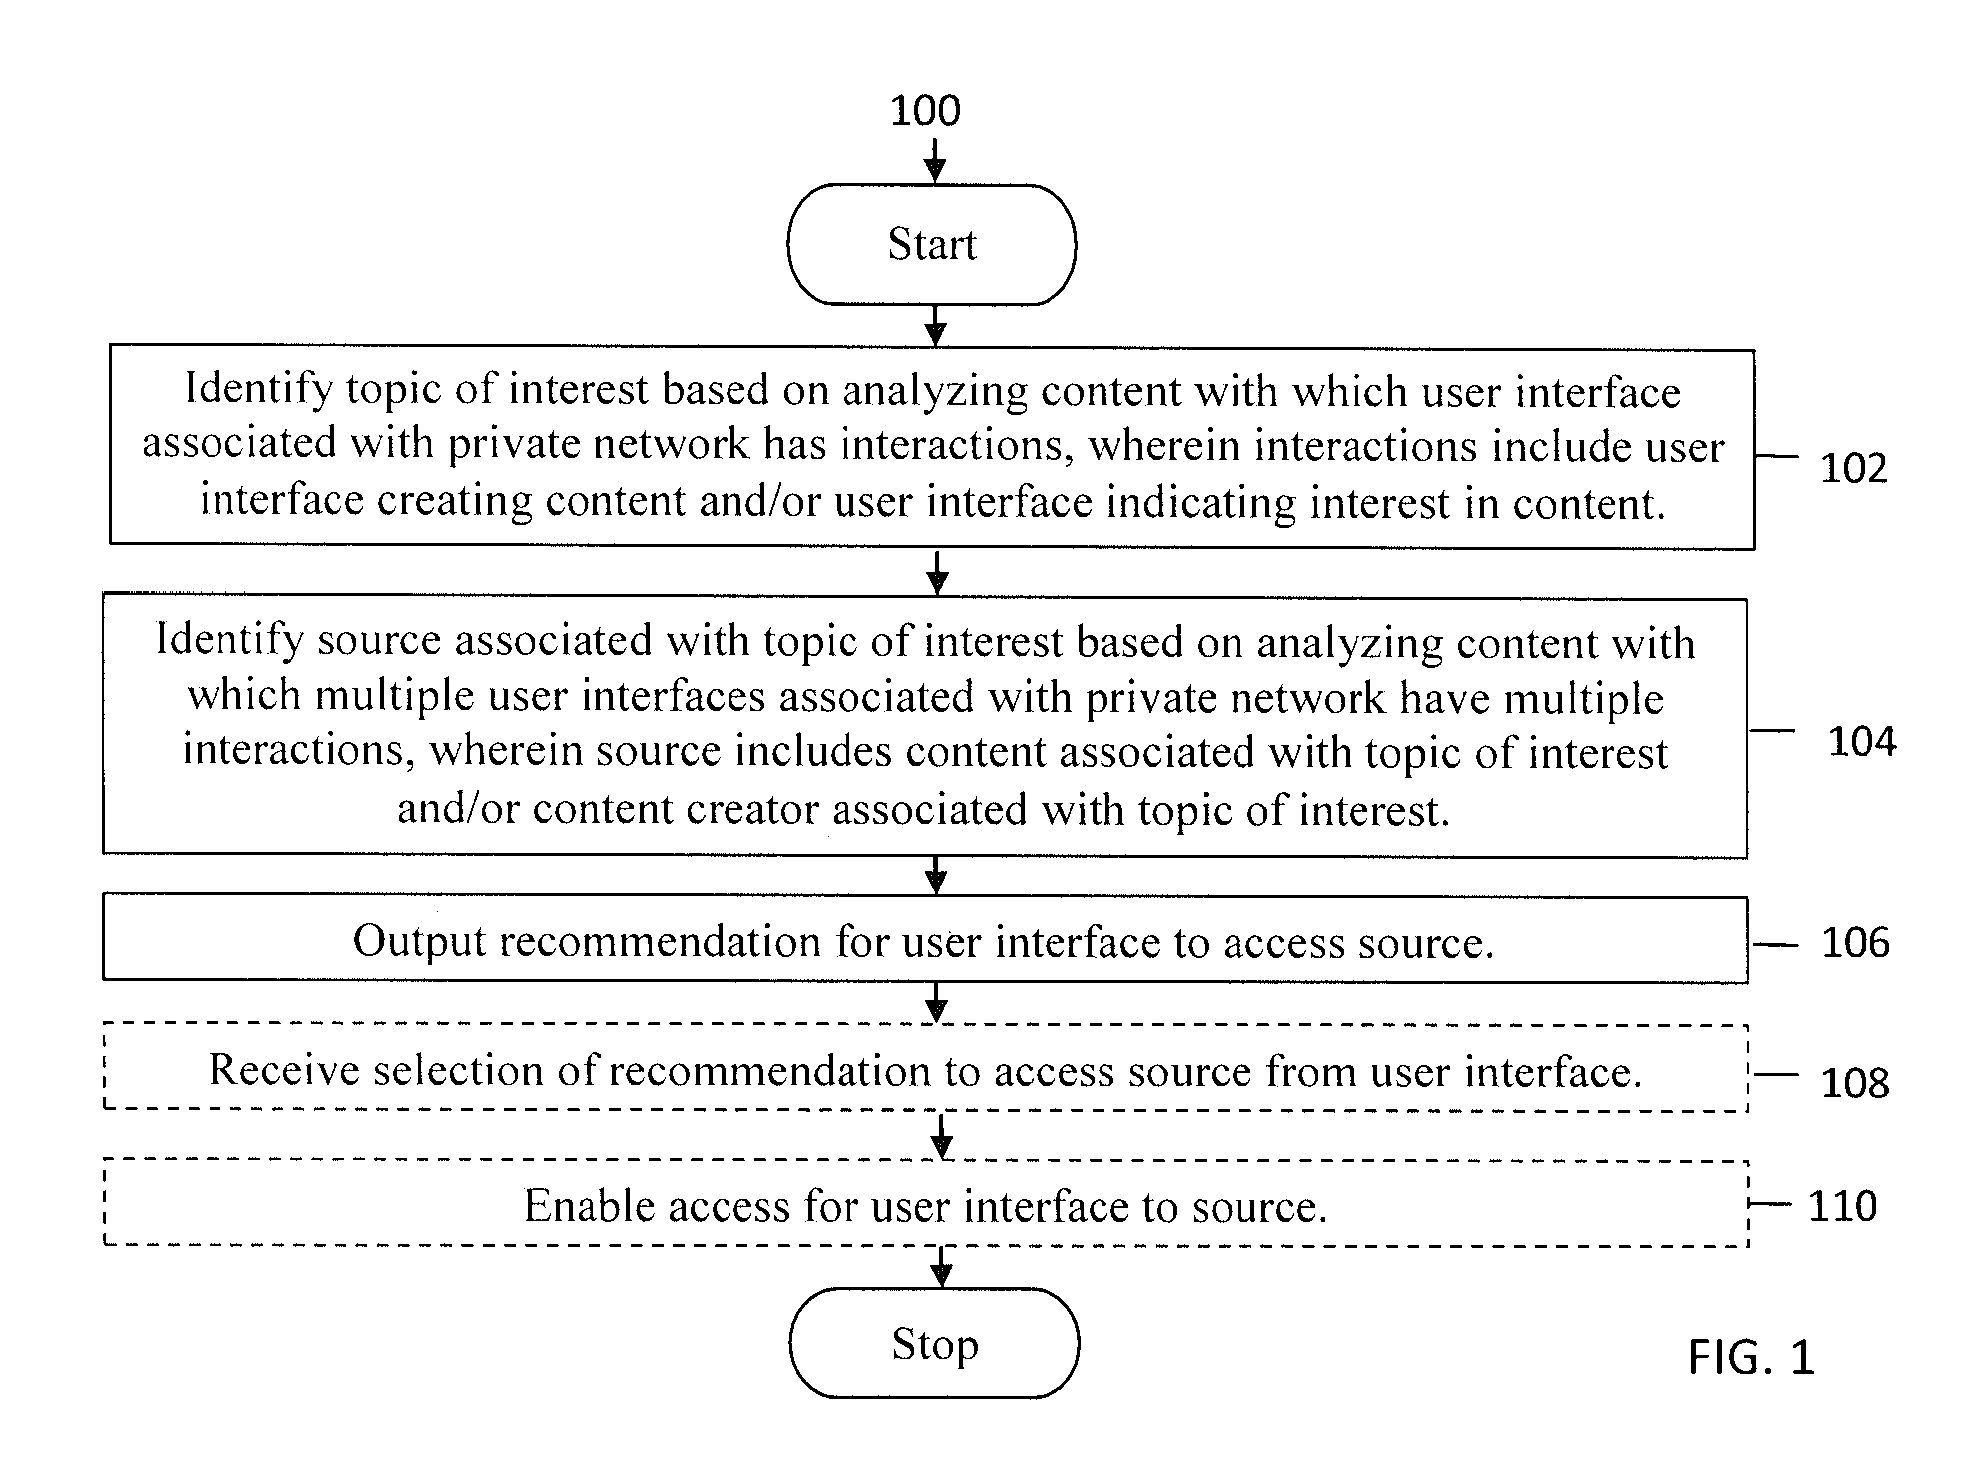 System and method for content-based recommendations for private network users